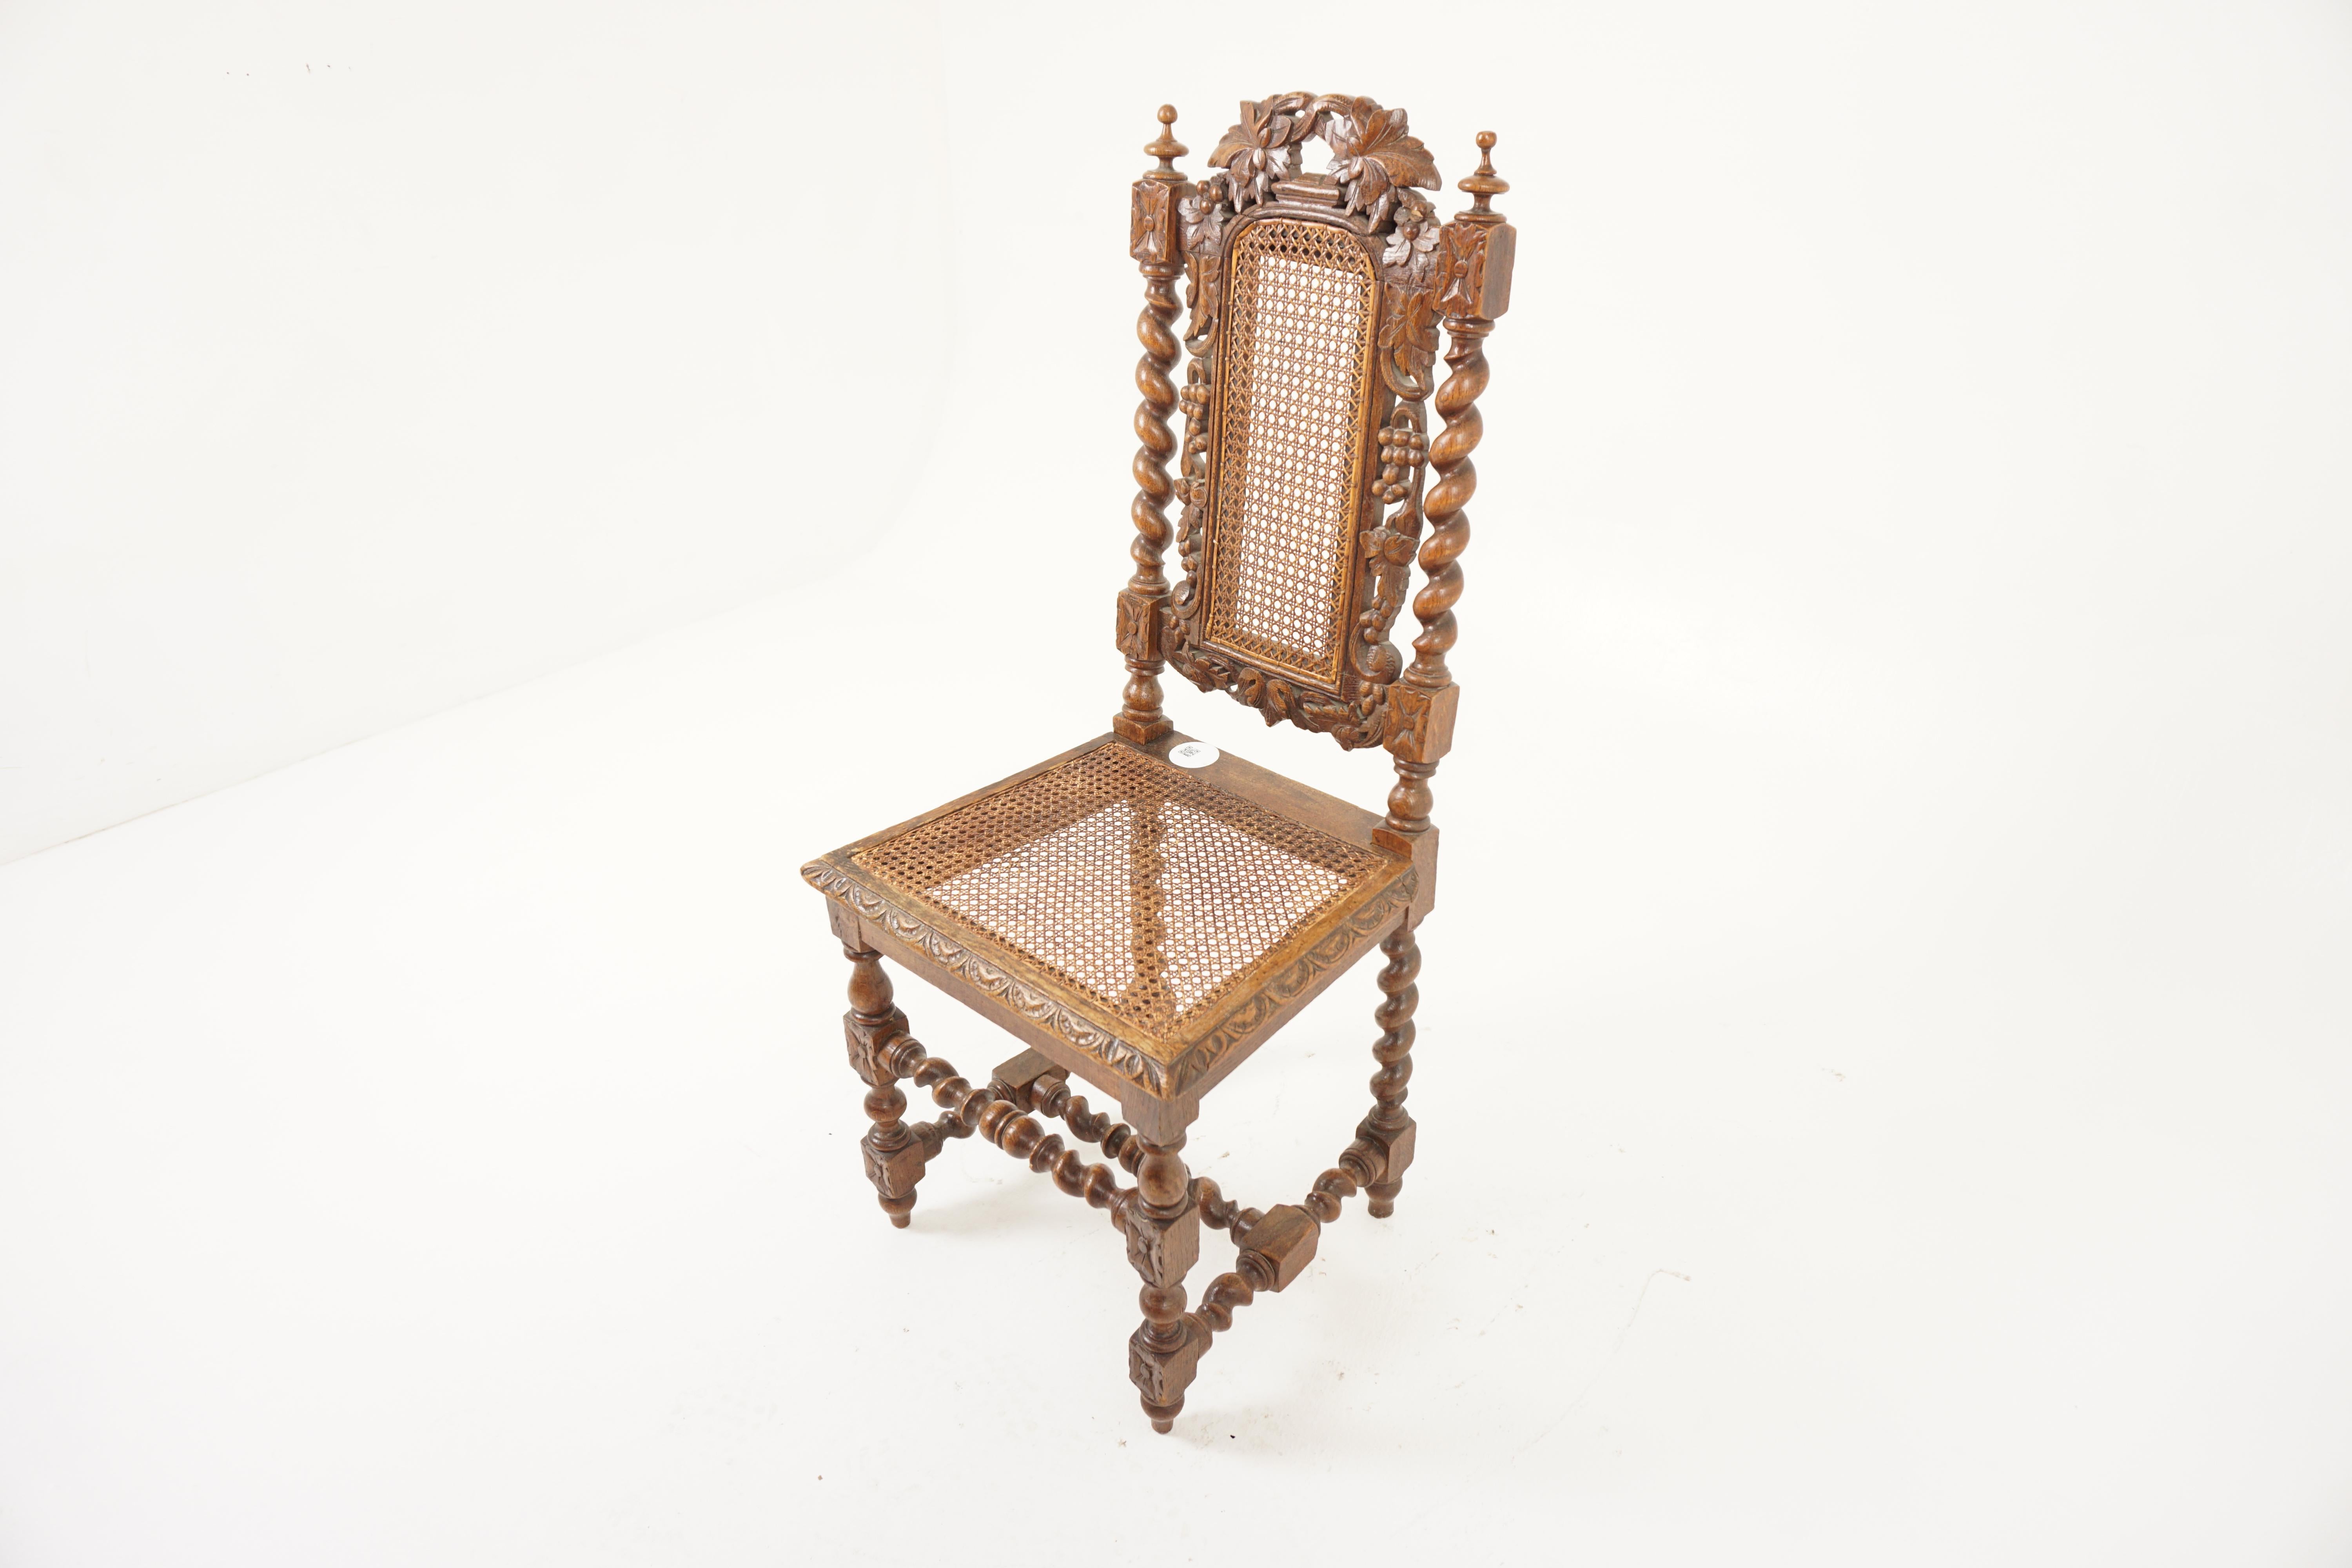 Antique Oak Chair, Gothic Heavily Carved Barley Twist Oak Hall Chair, Desk Chair, Antique Furniture, Scotland 1880, H1063

+ Scotland 1880
+ Solid Oak 
+ Original Finish 
+ Having fruiting vines and very ornate cresting
+ With turned finials